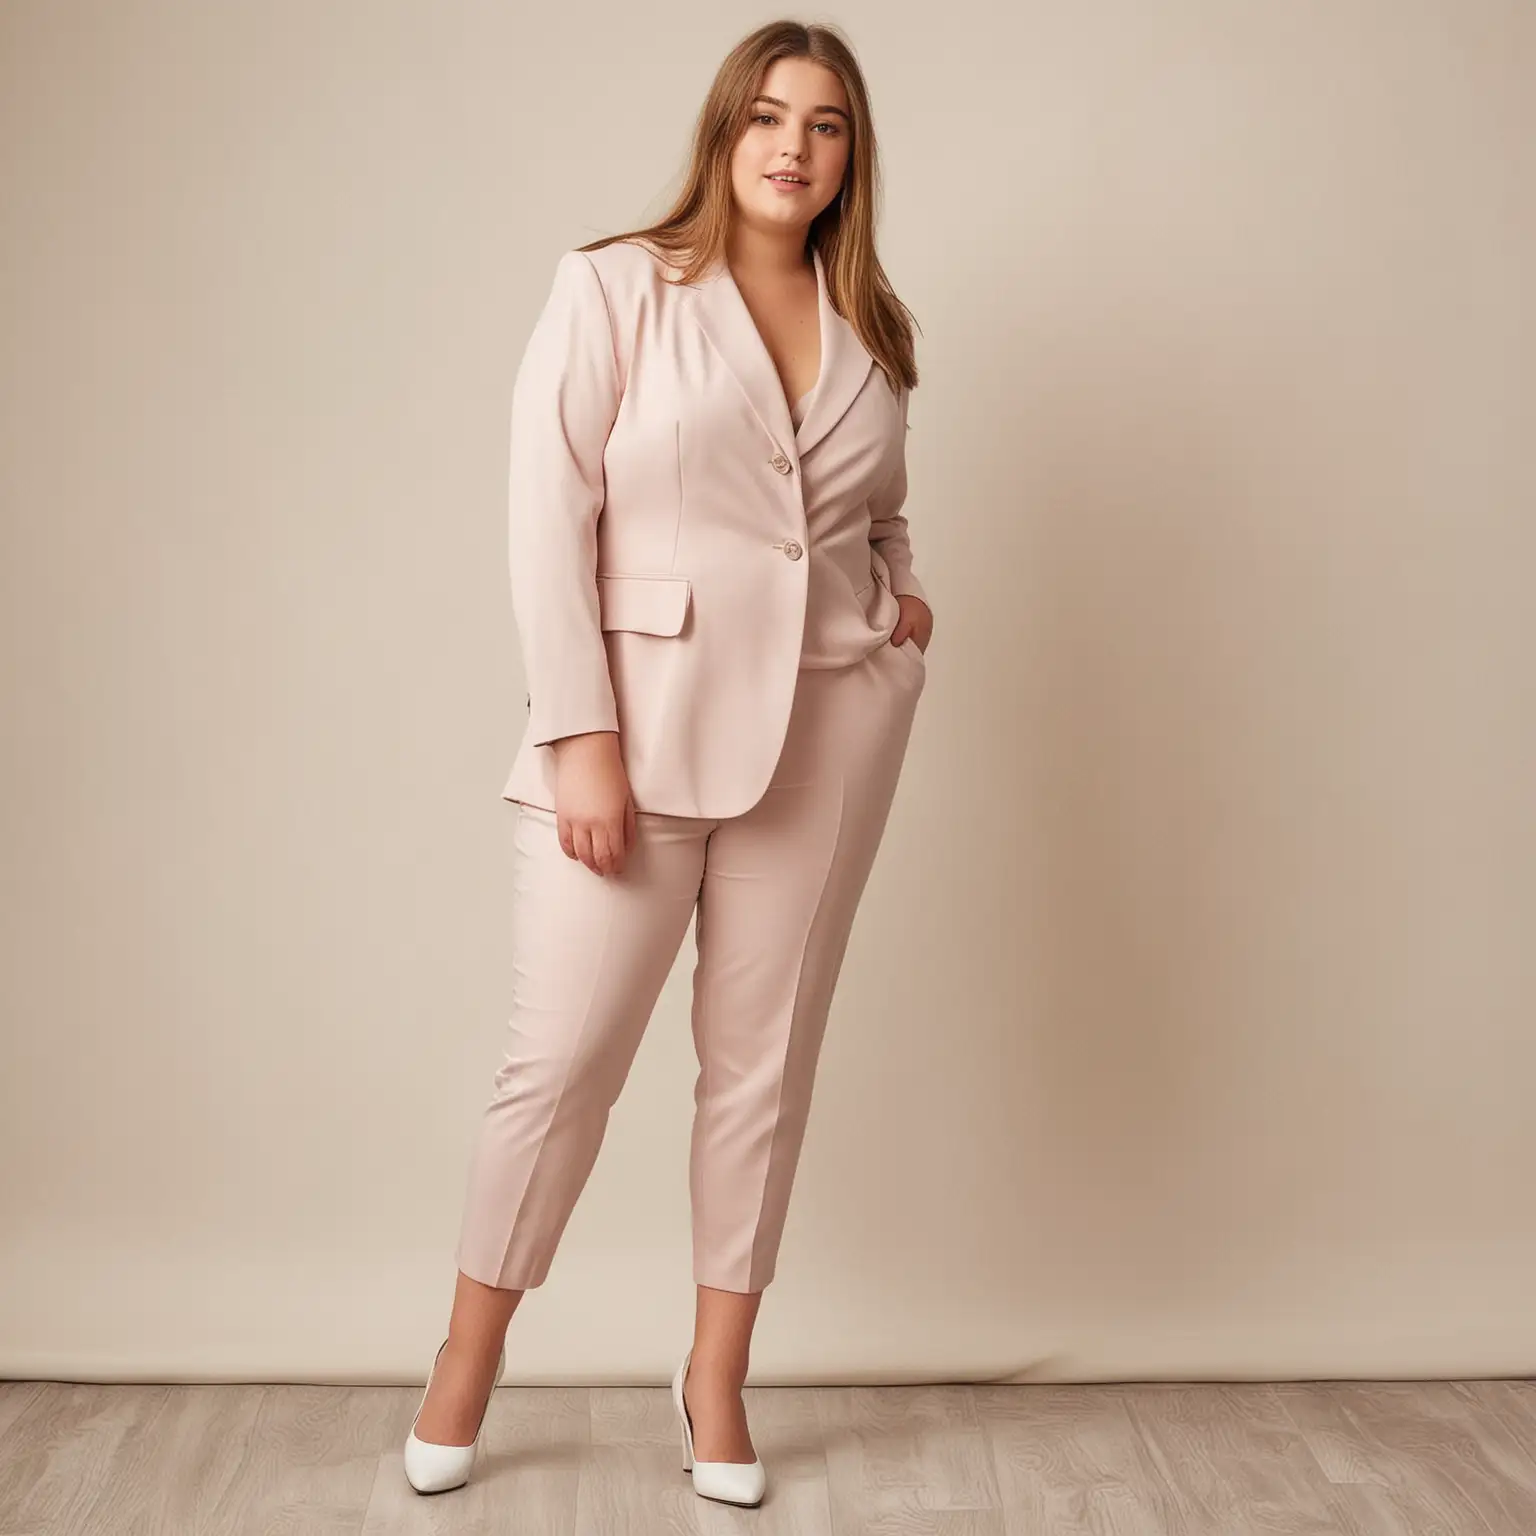 white teenage girl dressed for an interview in a pantsuit and mary janes. it is a teenage girl and should look like a teenager. she is a curvy plus size teen